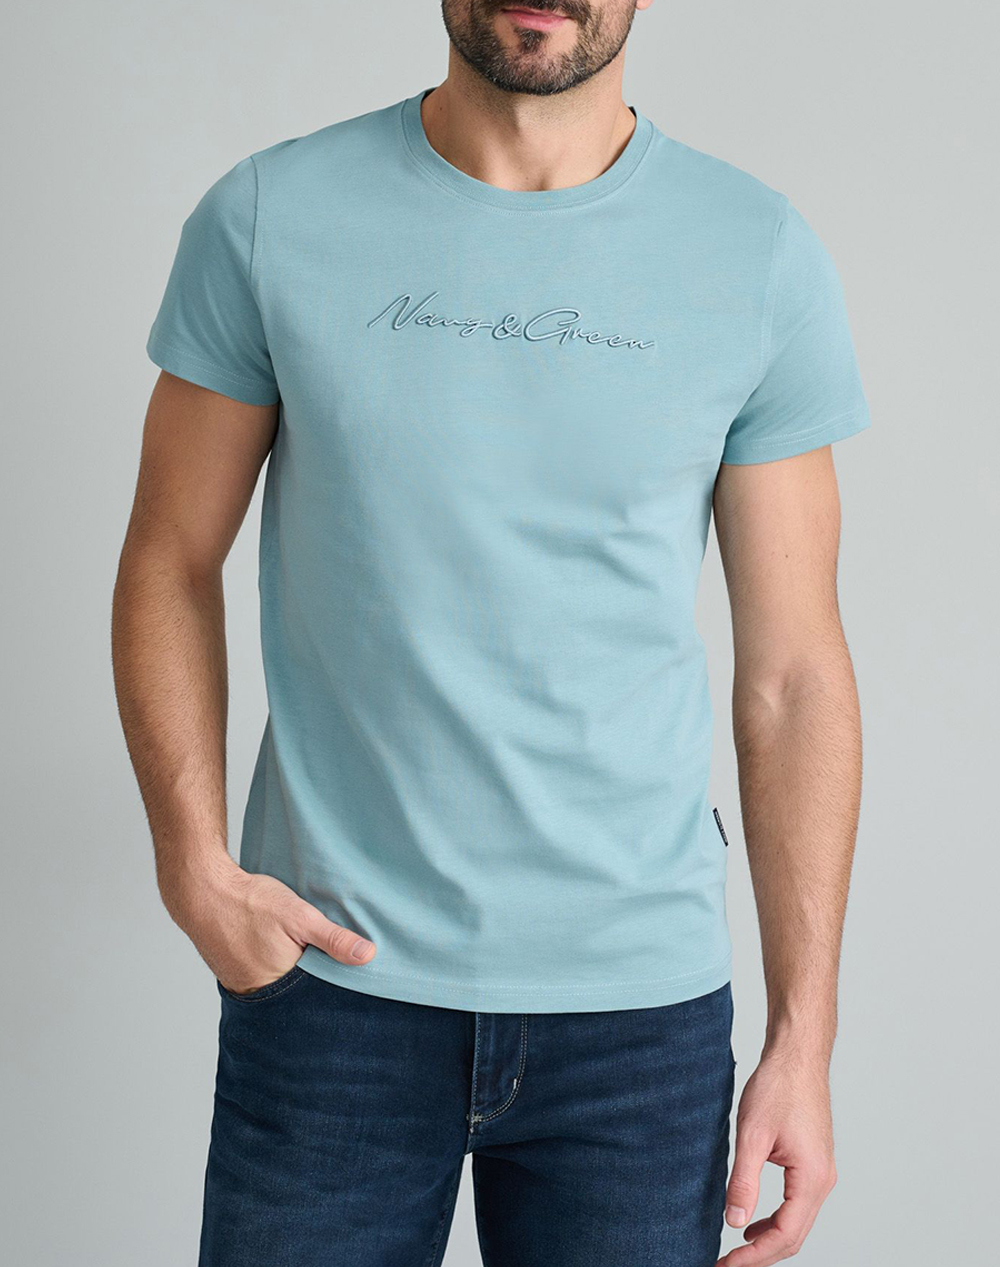 NAVY&GREEN T-SHIRTS-Τ-SHIRTS 24TU.322/11P-DUSTY TURQUOISE Turquoise